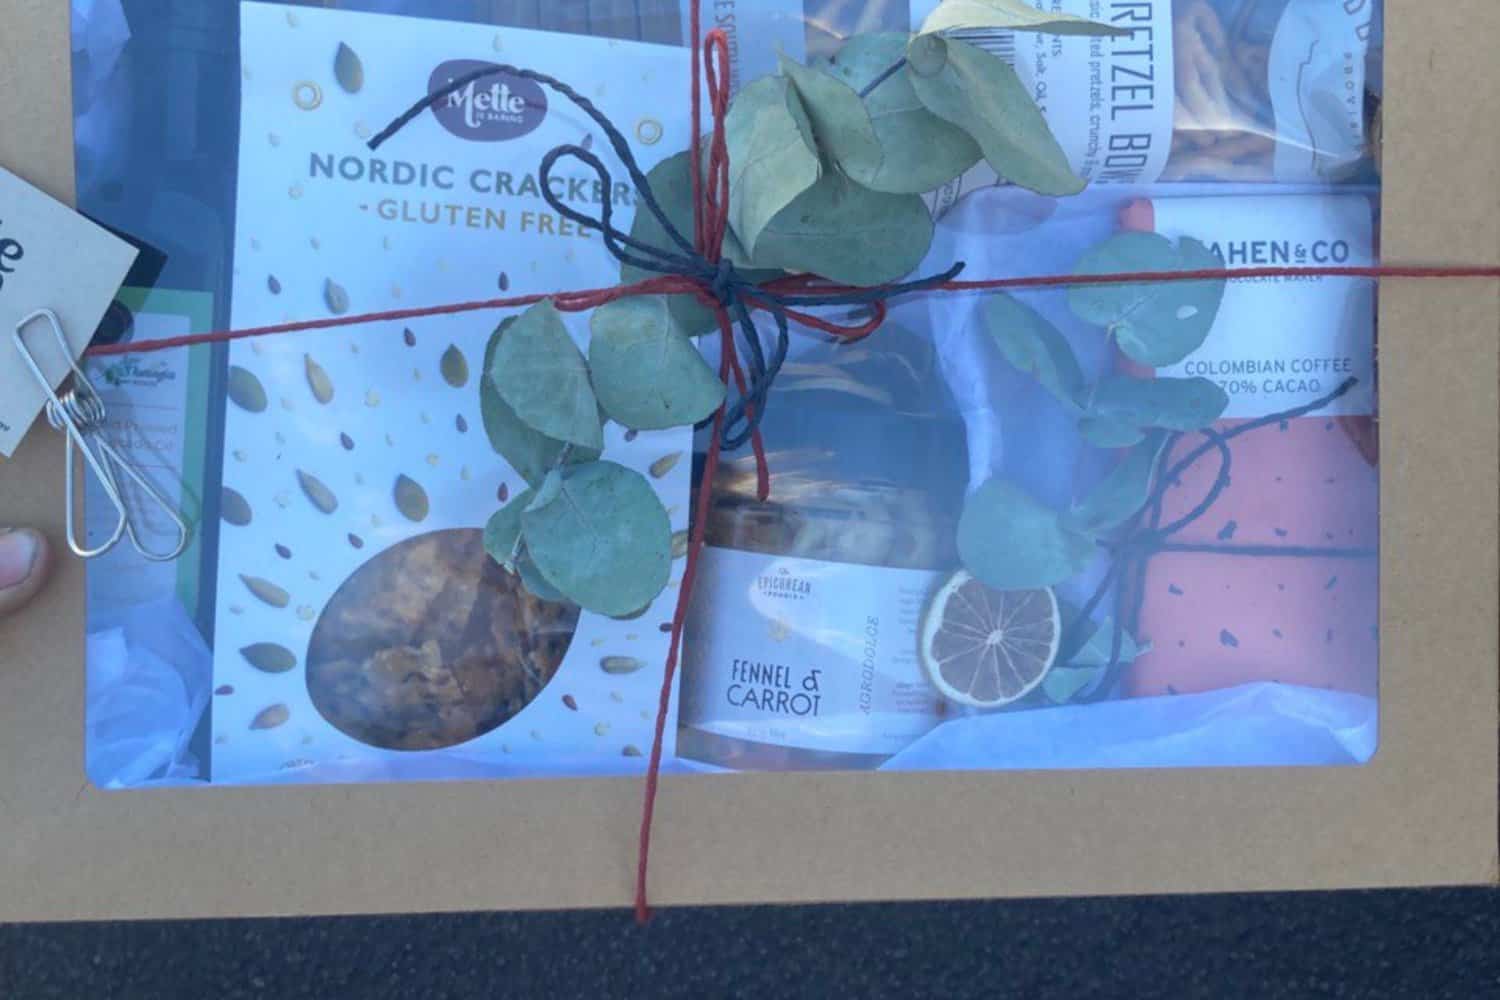 A delightful hamper from The Little Farm, brimming with an array of local Margaret River produce, including the best coffee the region has to offer.